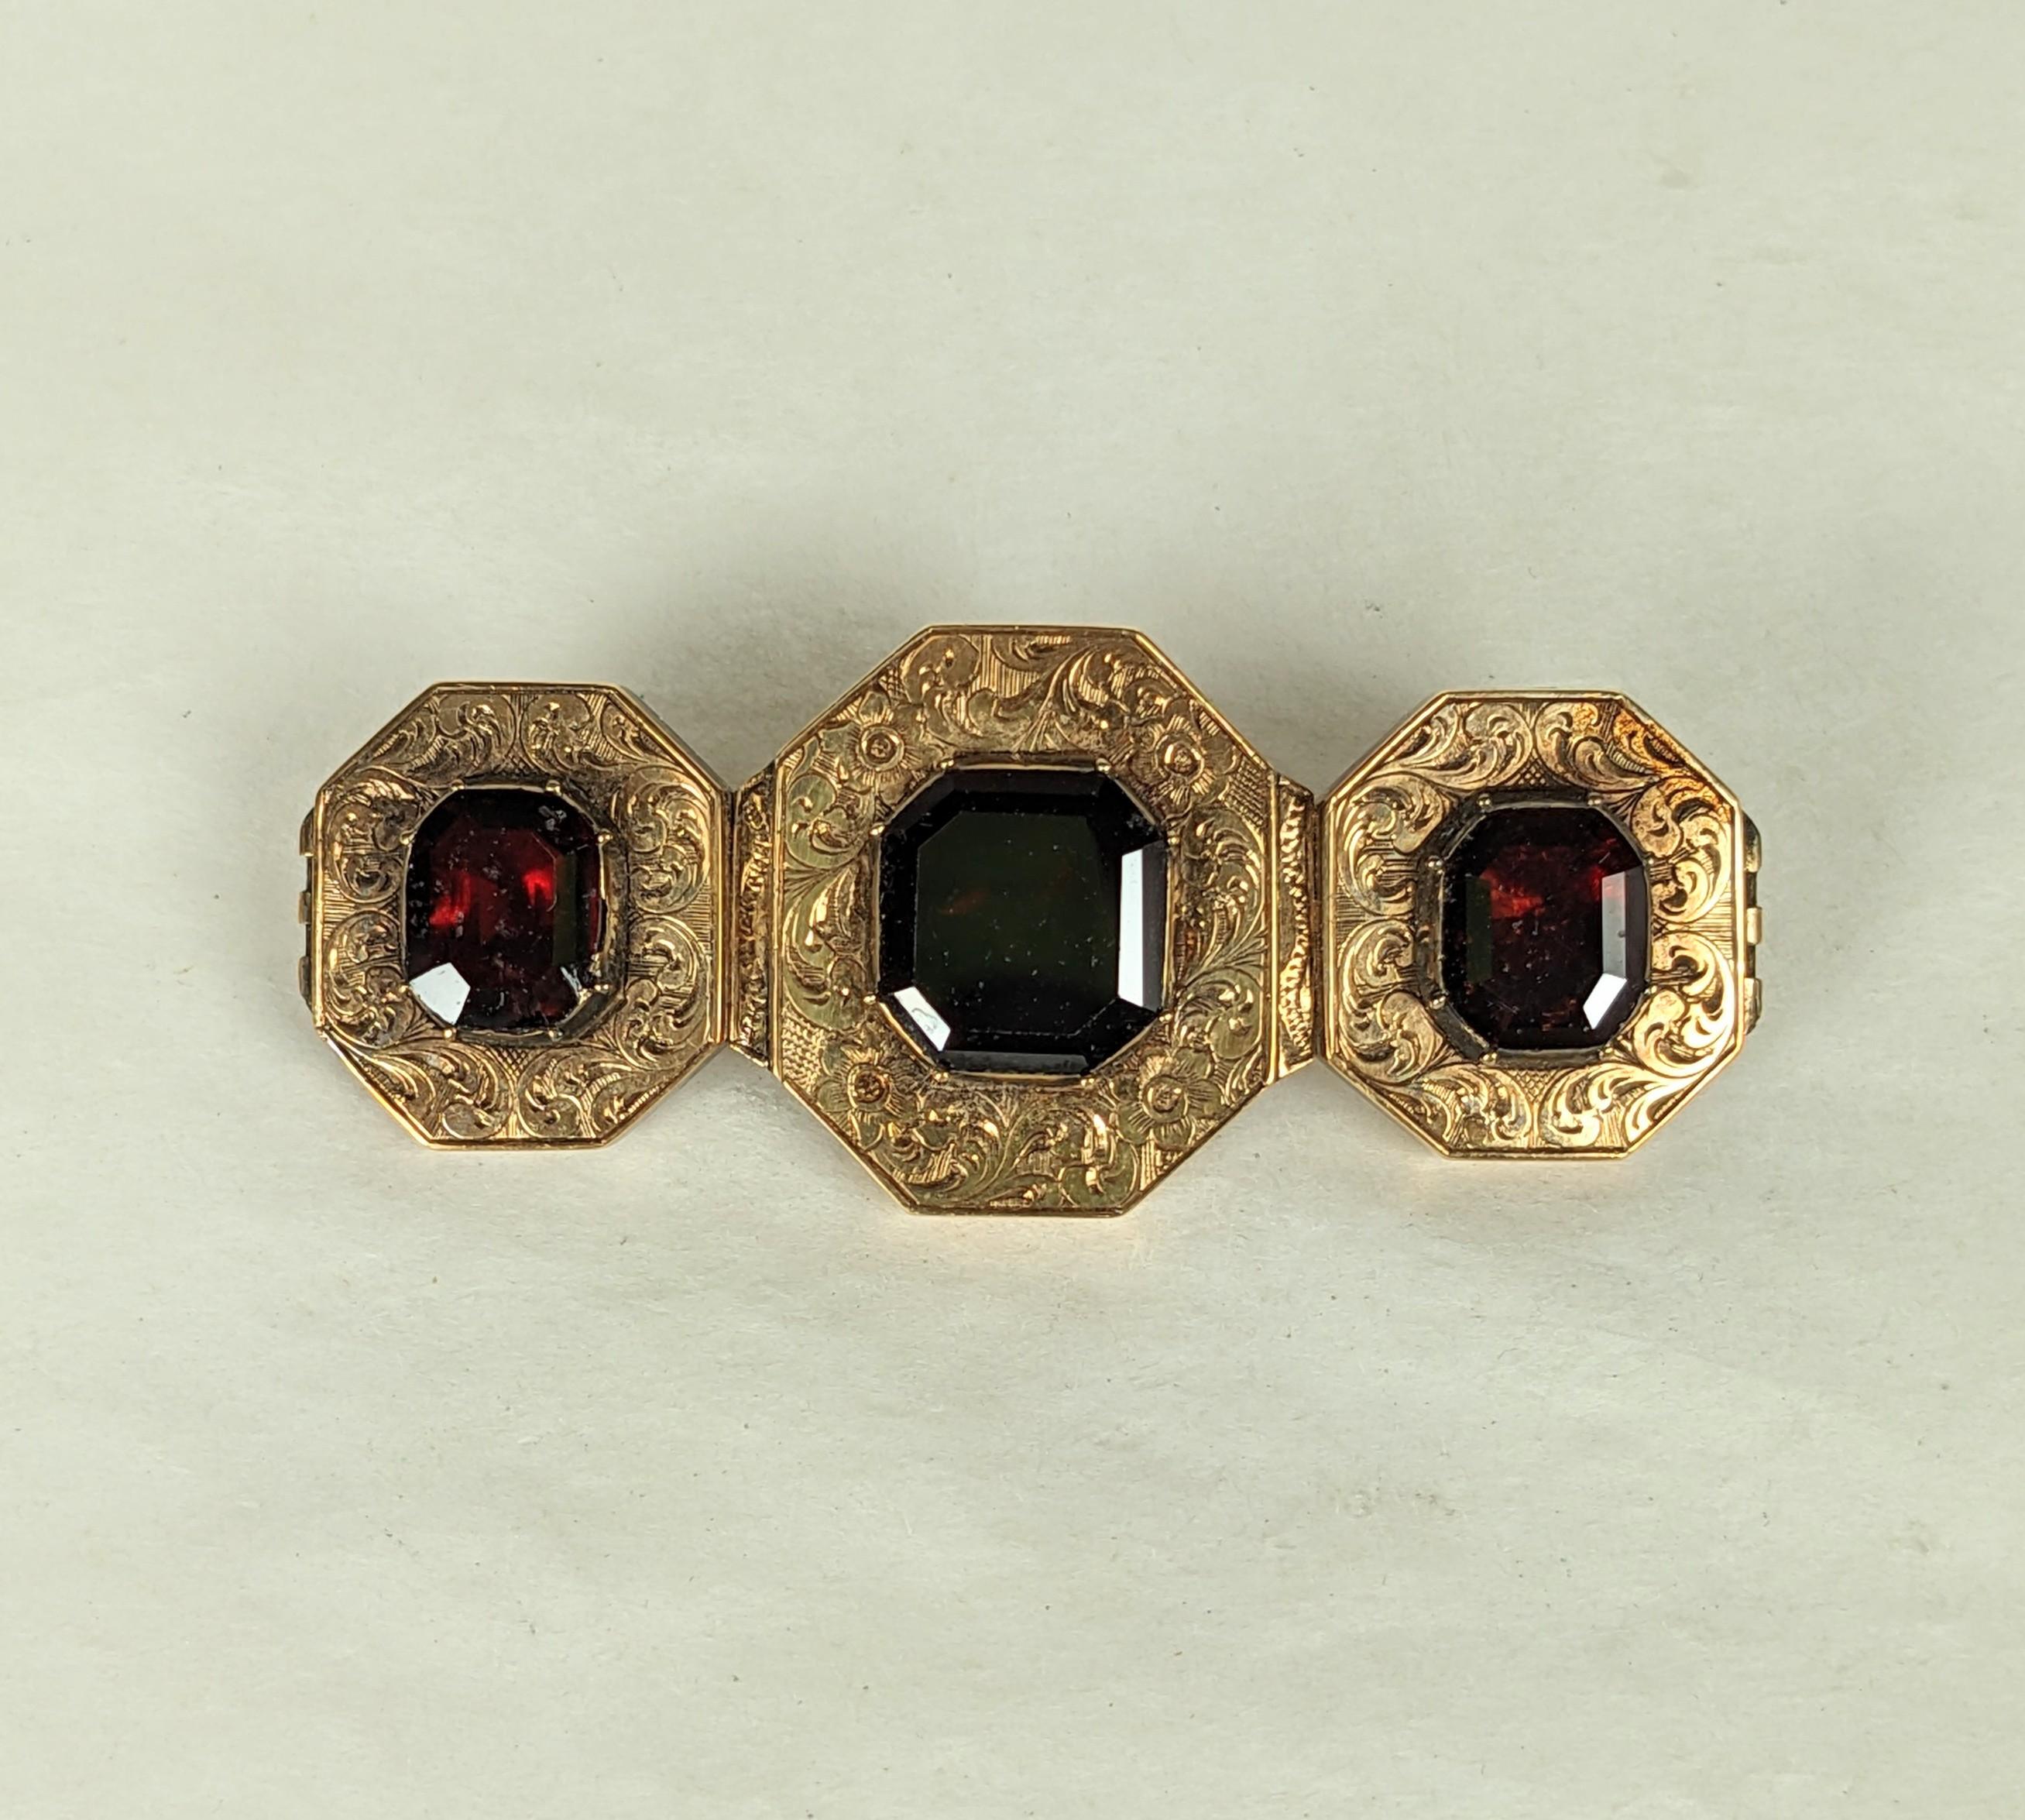 Victorian Etched Gold Garnet Brooch which was converted from a bracelet into a brooch circa 1910. Early 14K gold hand etched setting with octagonal cut foiled garnets which has been stabilized onto a gold backing inscribed with initials and date